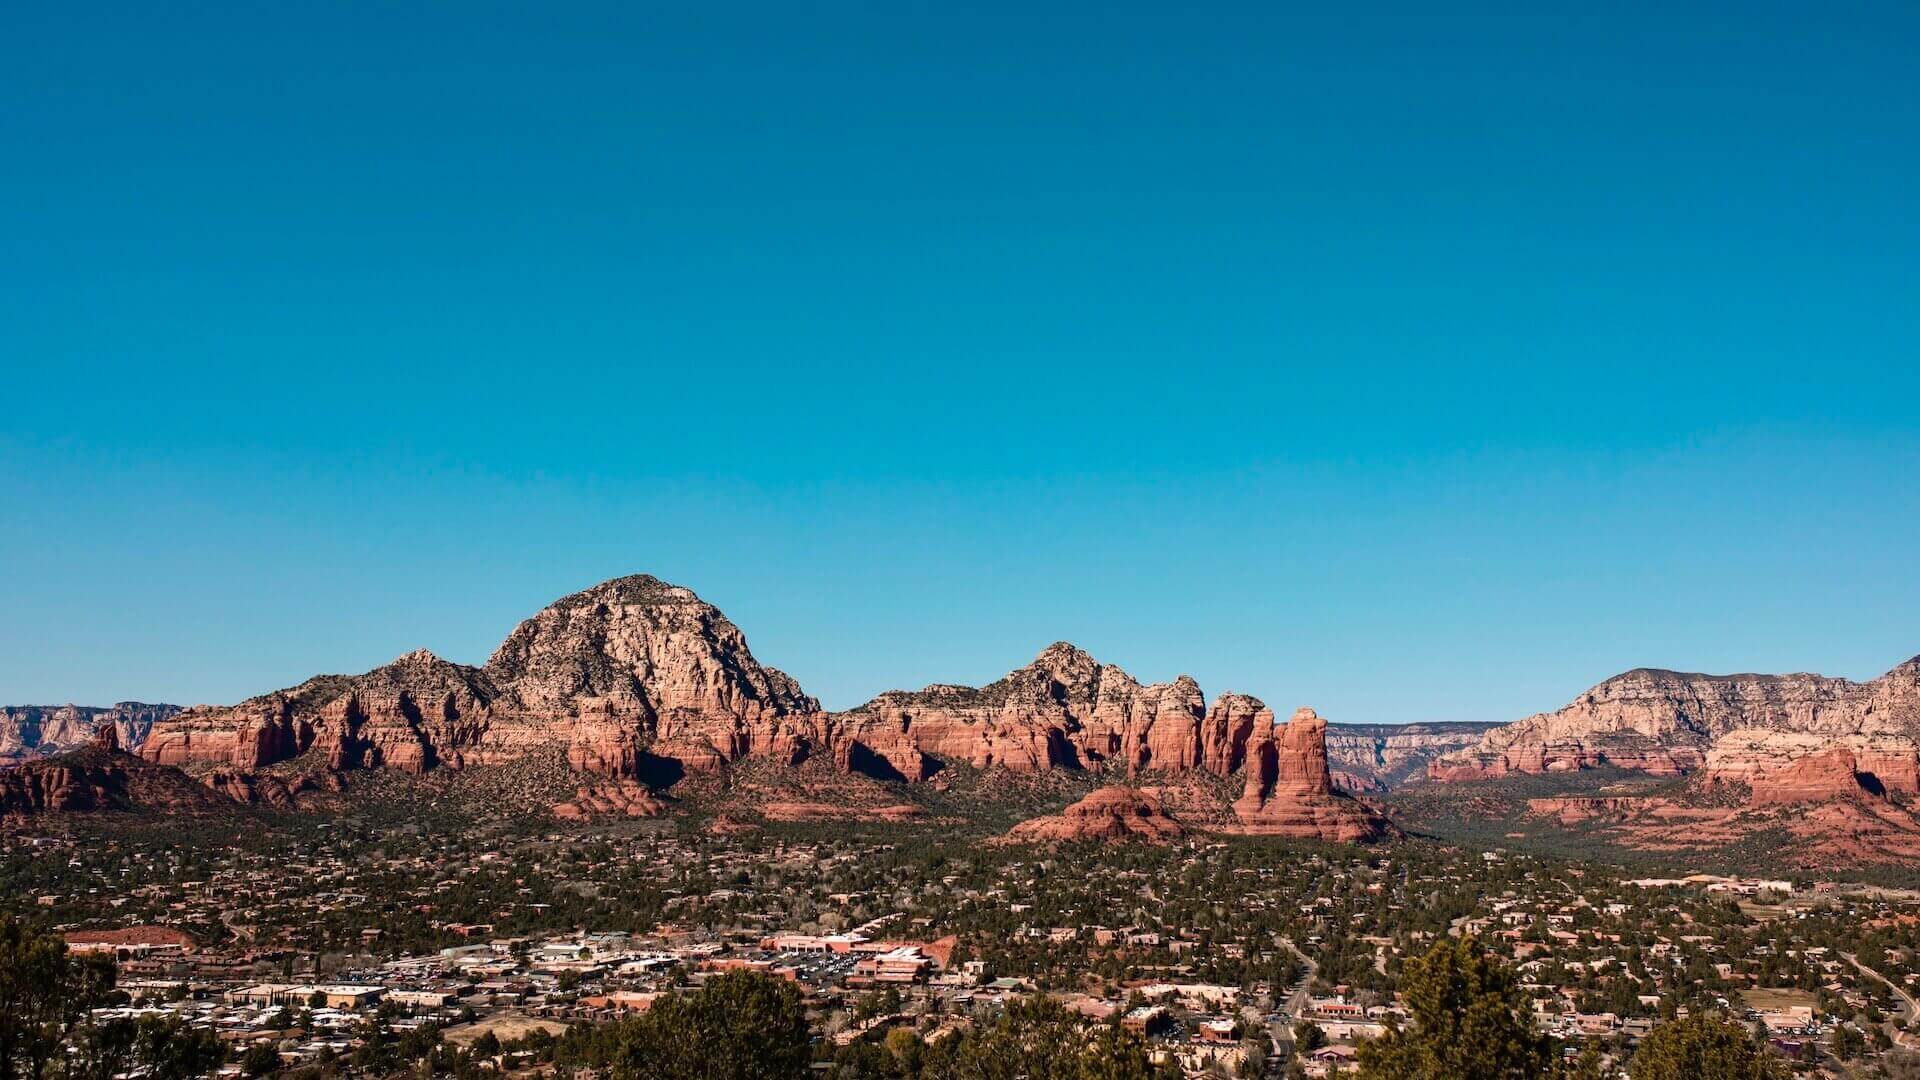 Sedona: A Guide to the Most Scenic and Spiritual City in Arizona